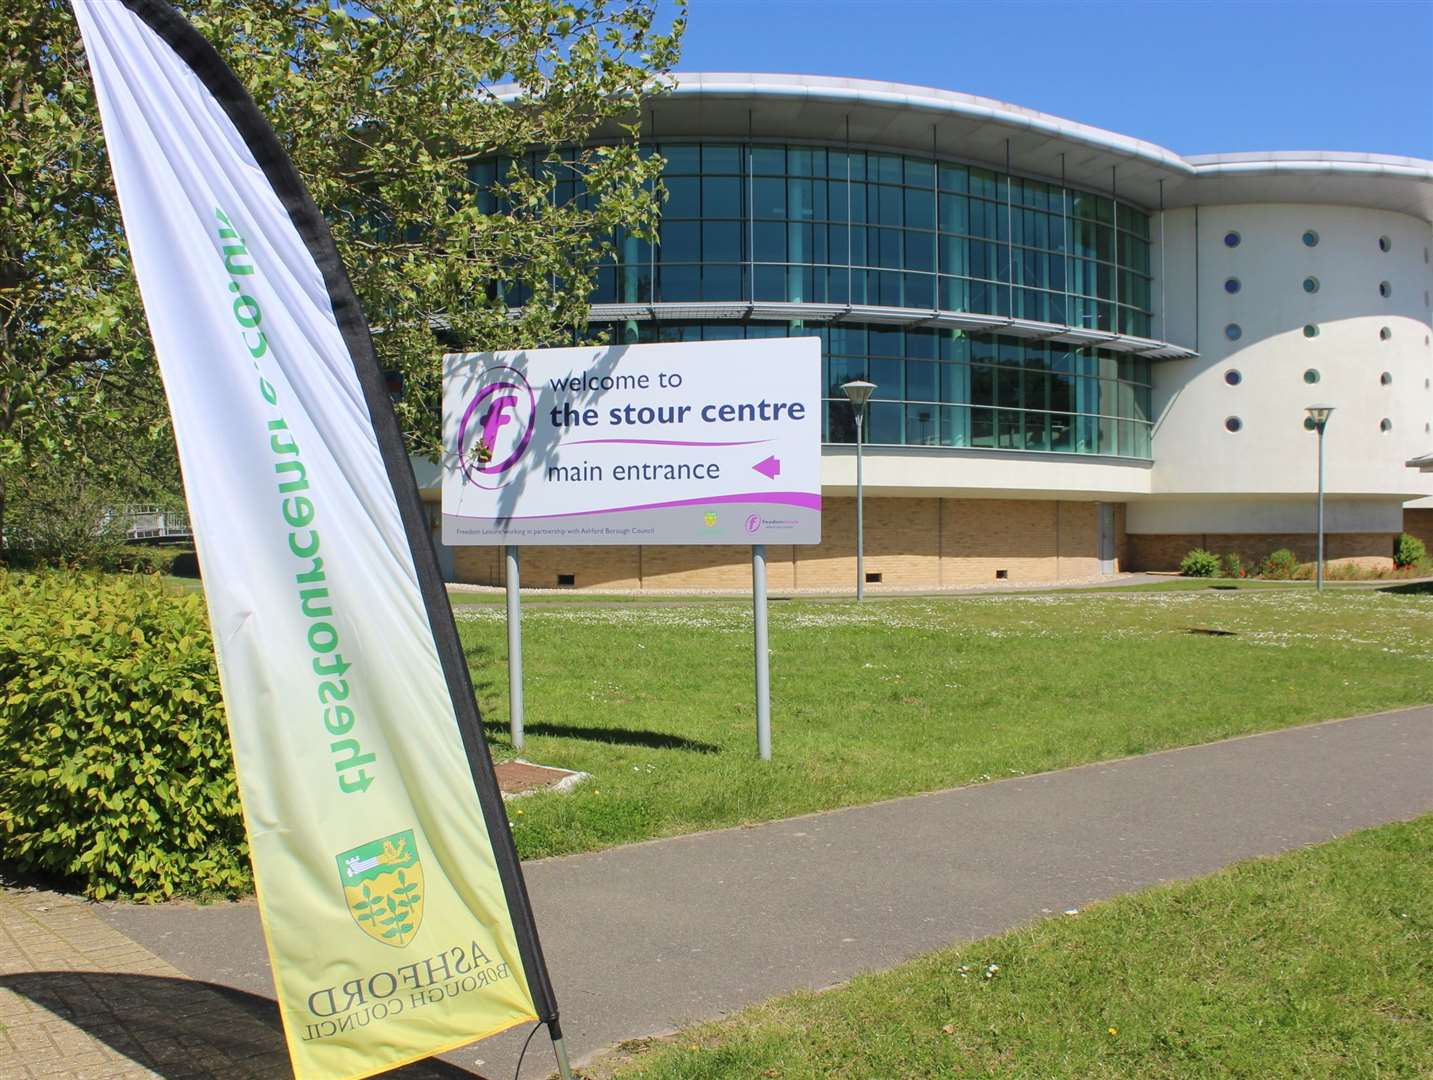 Reporter Charlie Harman thinks the newly reopened Stour Centre is well worth a visit